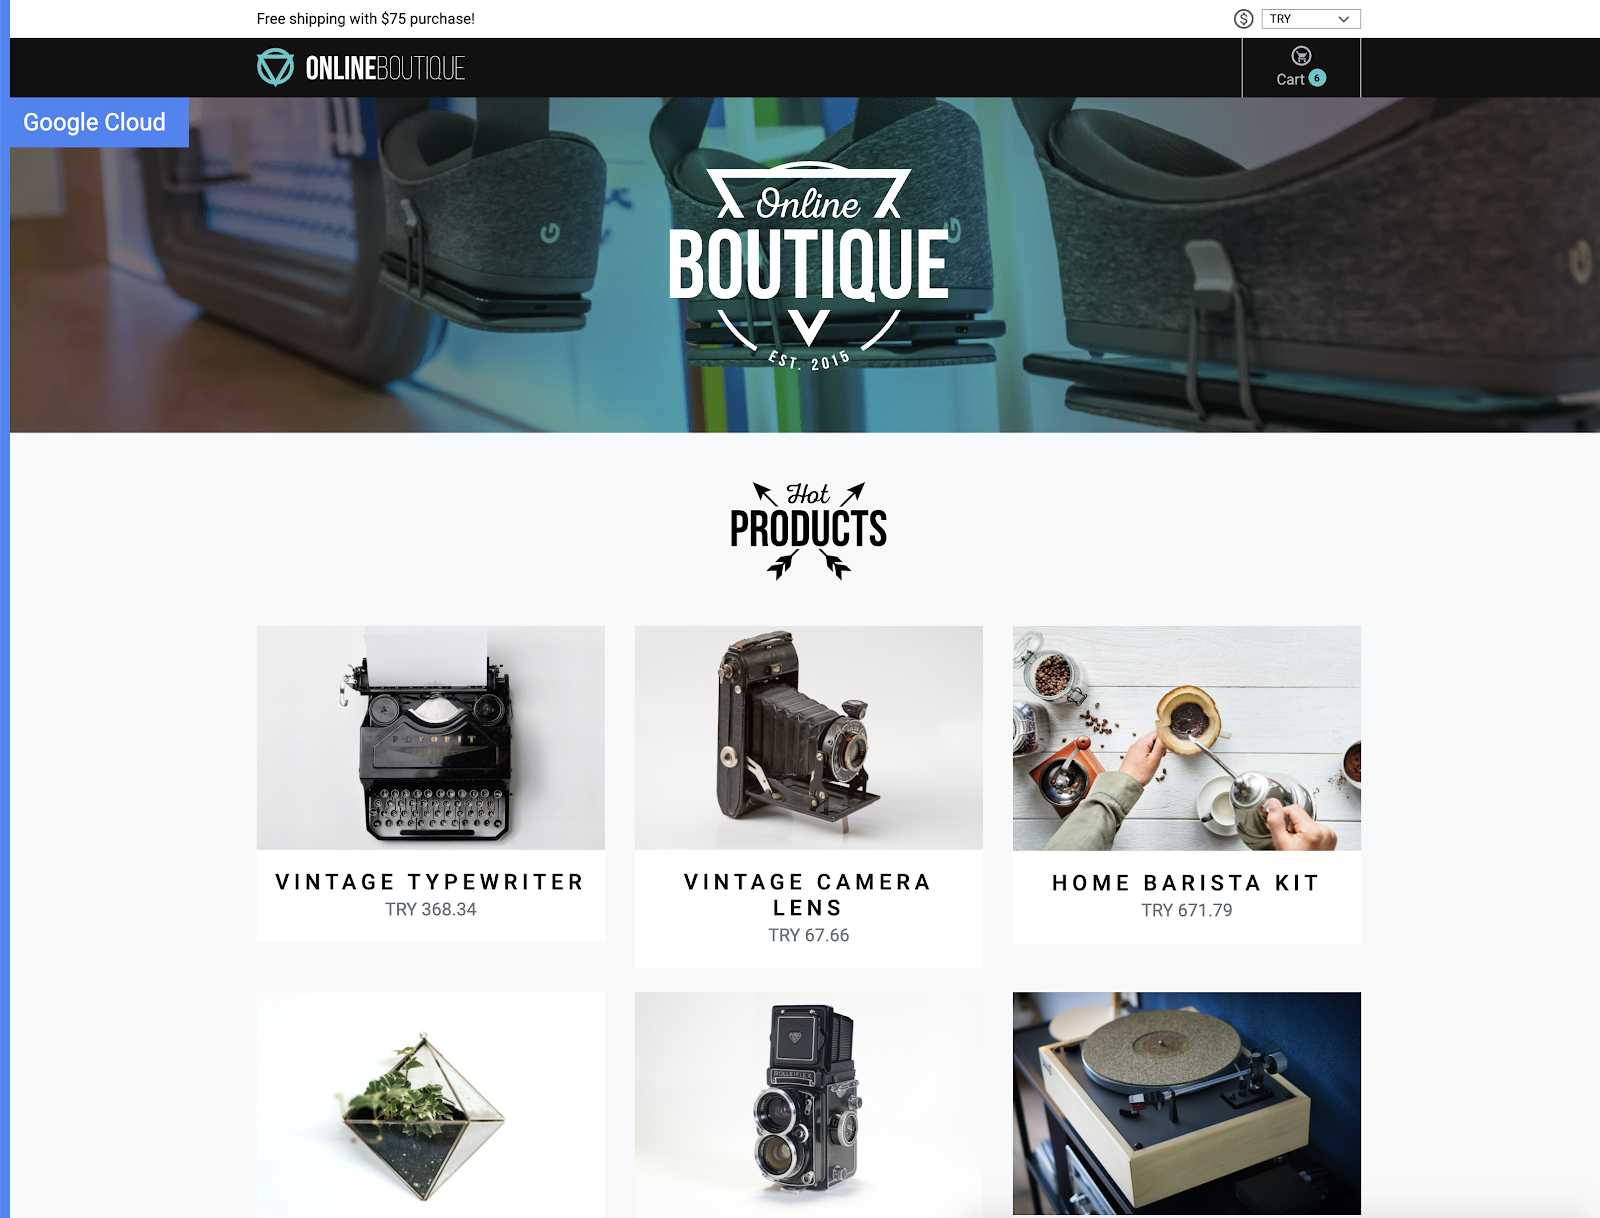 The Online Boutique web page displaying product tiles